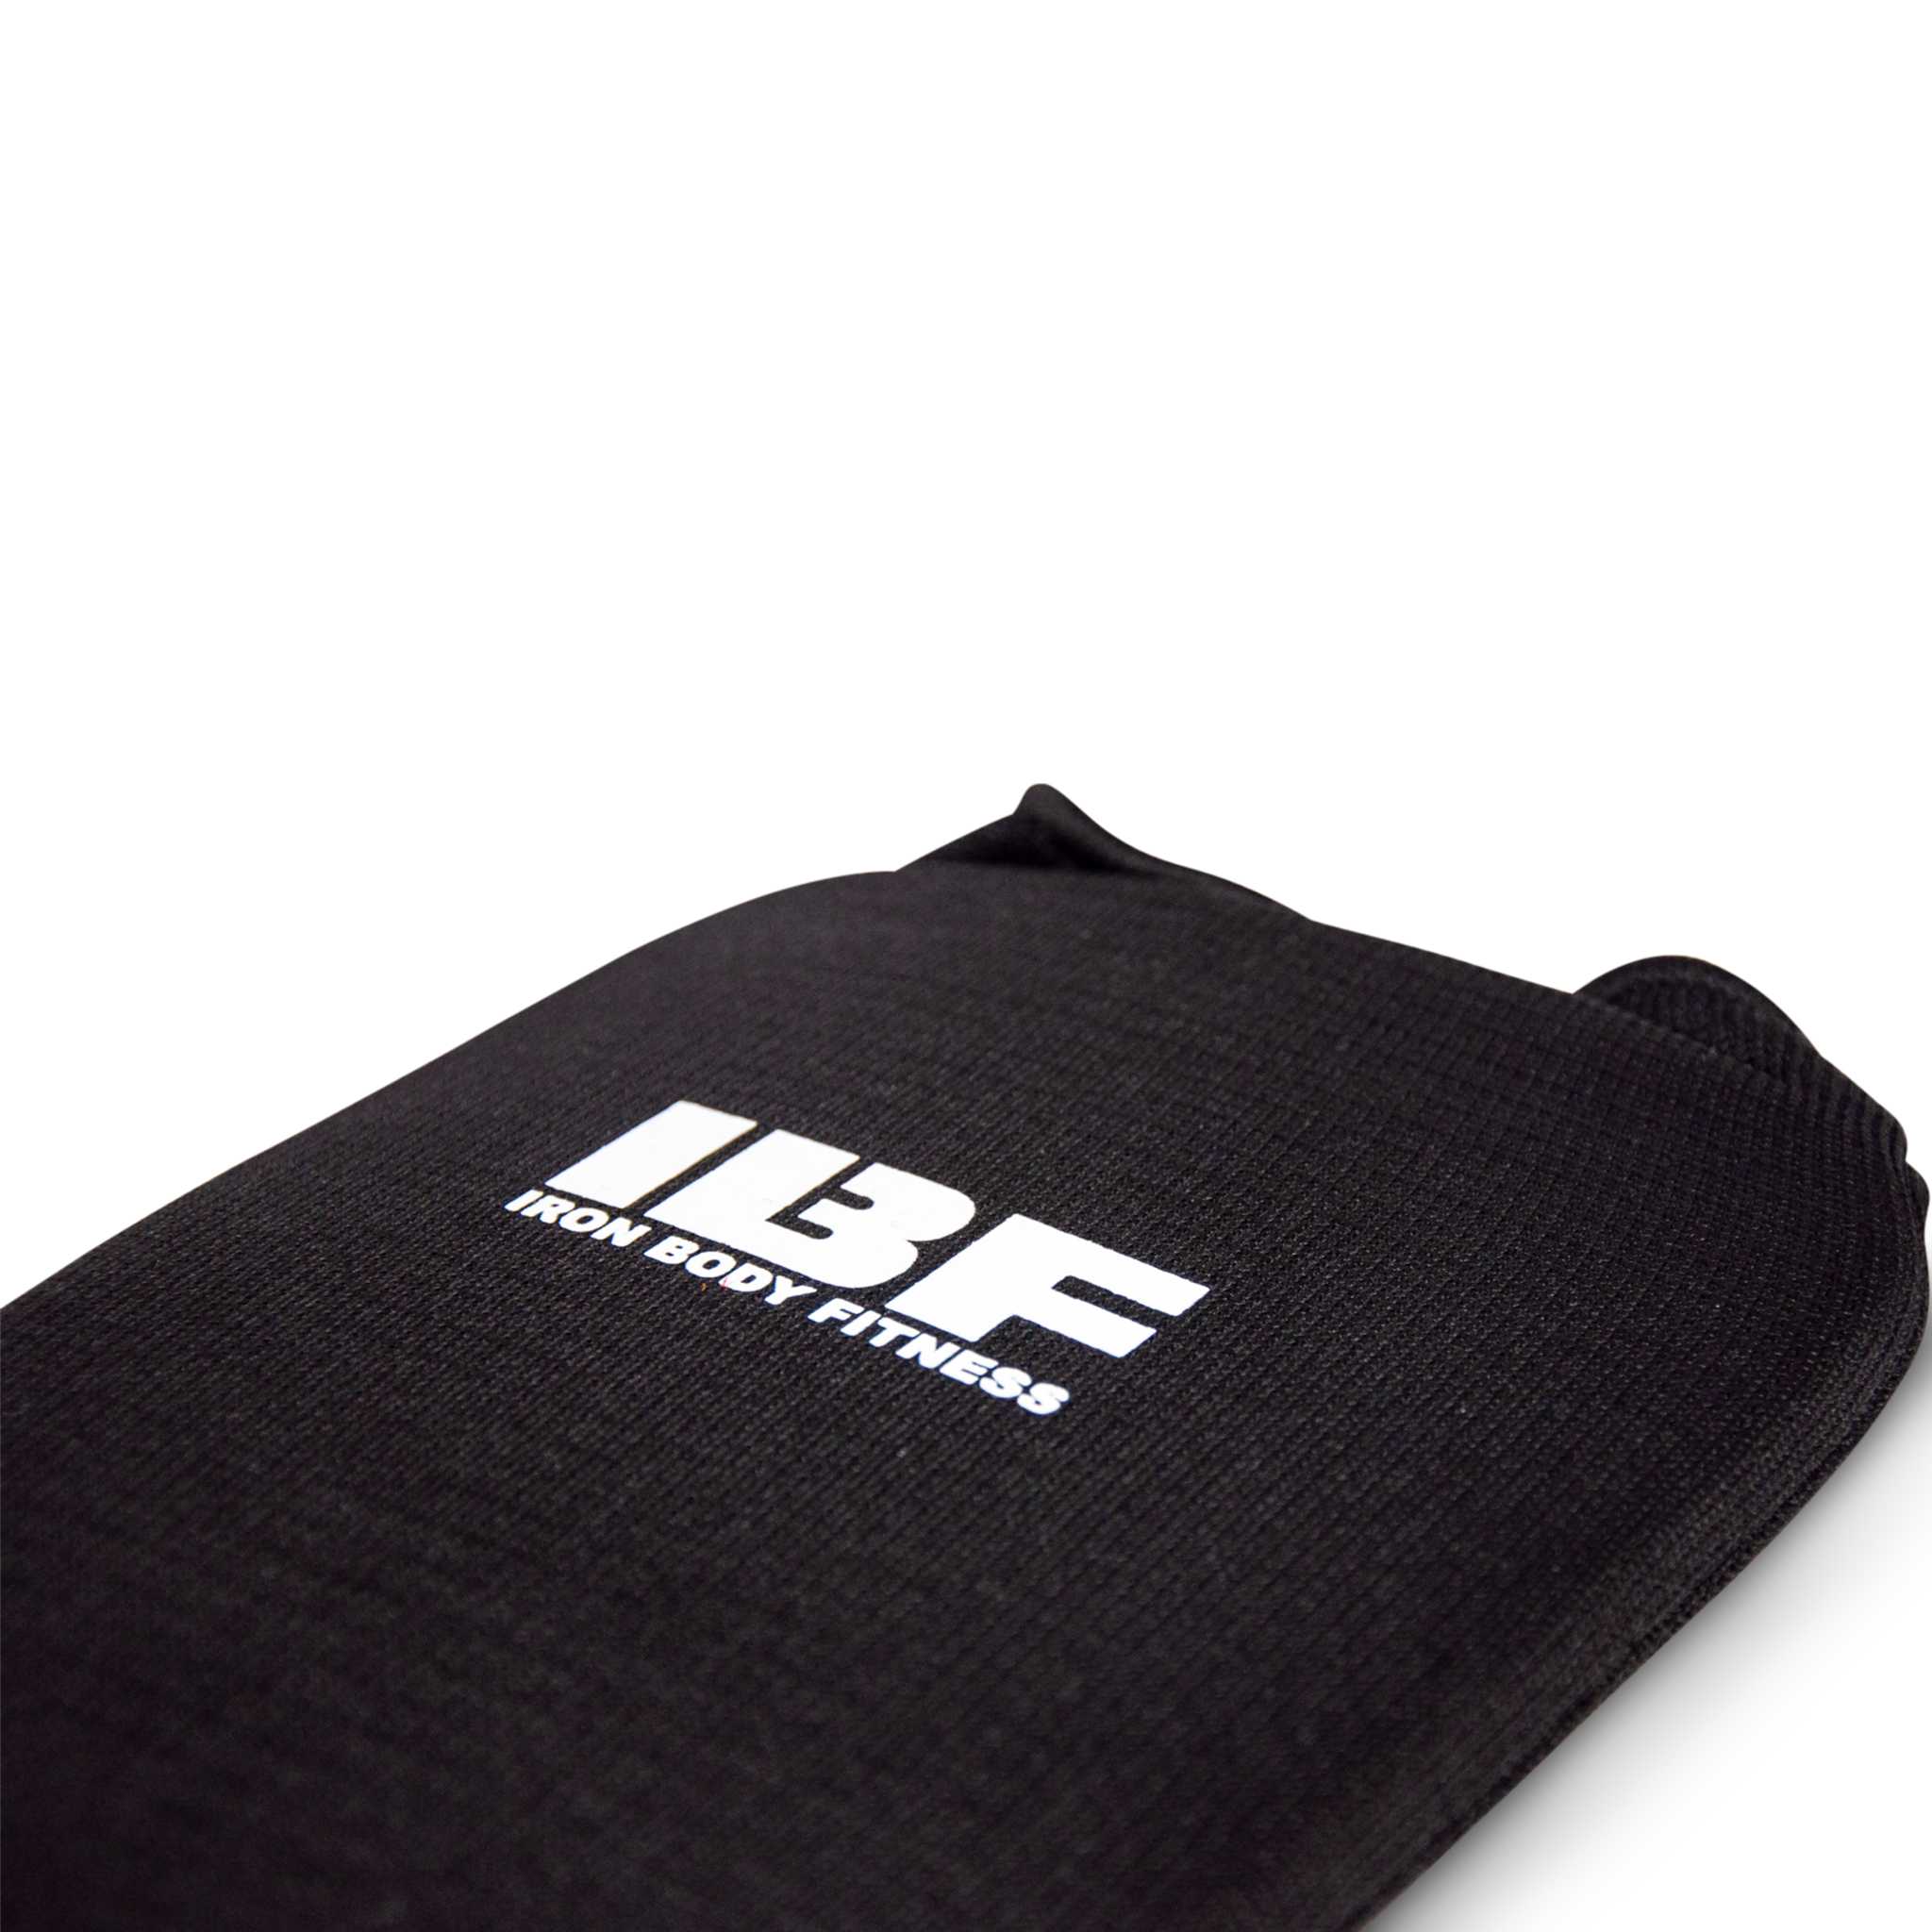 IBF MMA Training Shin Guards, Kick Pads for Muay Thai & Kickboxing, Available in Two Sizes